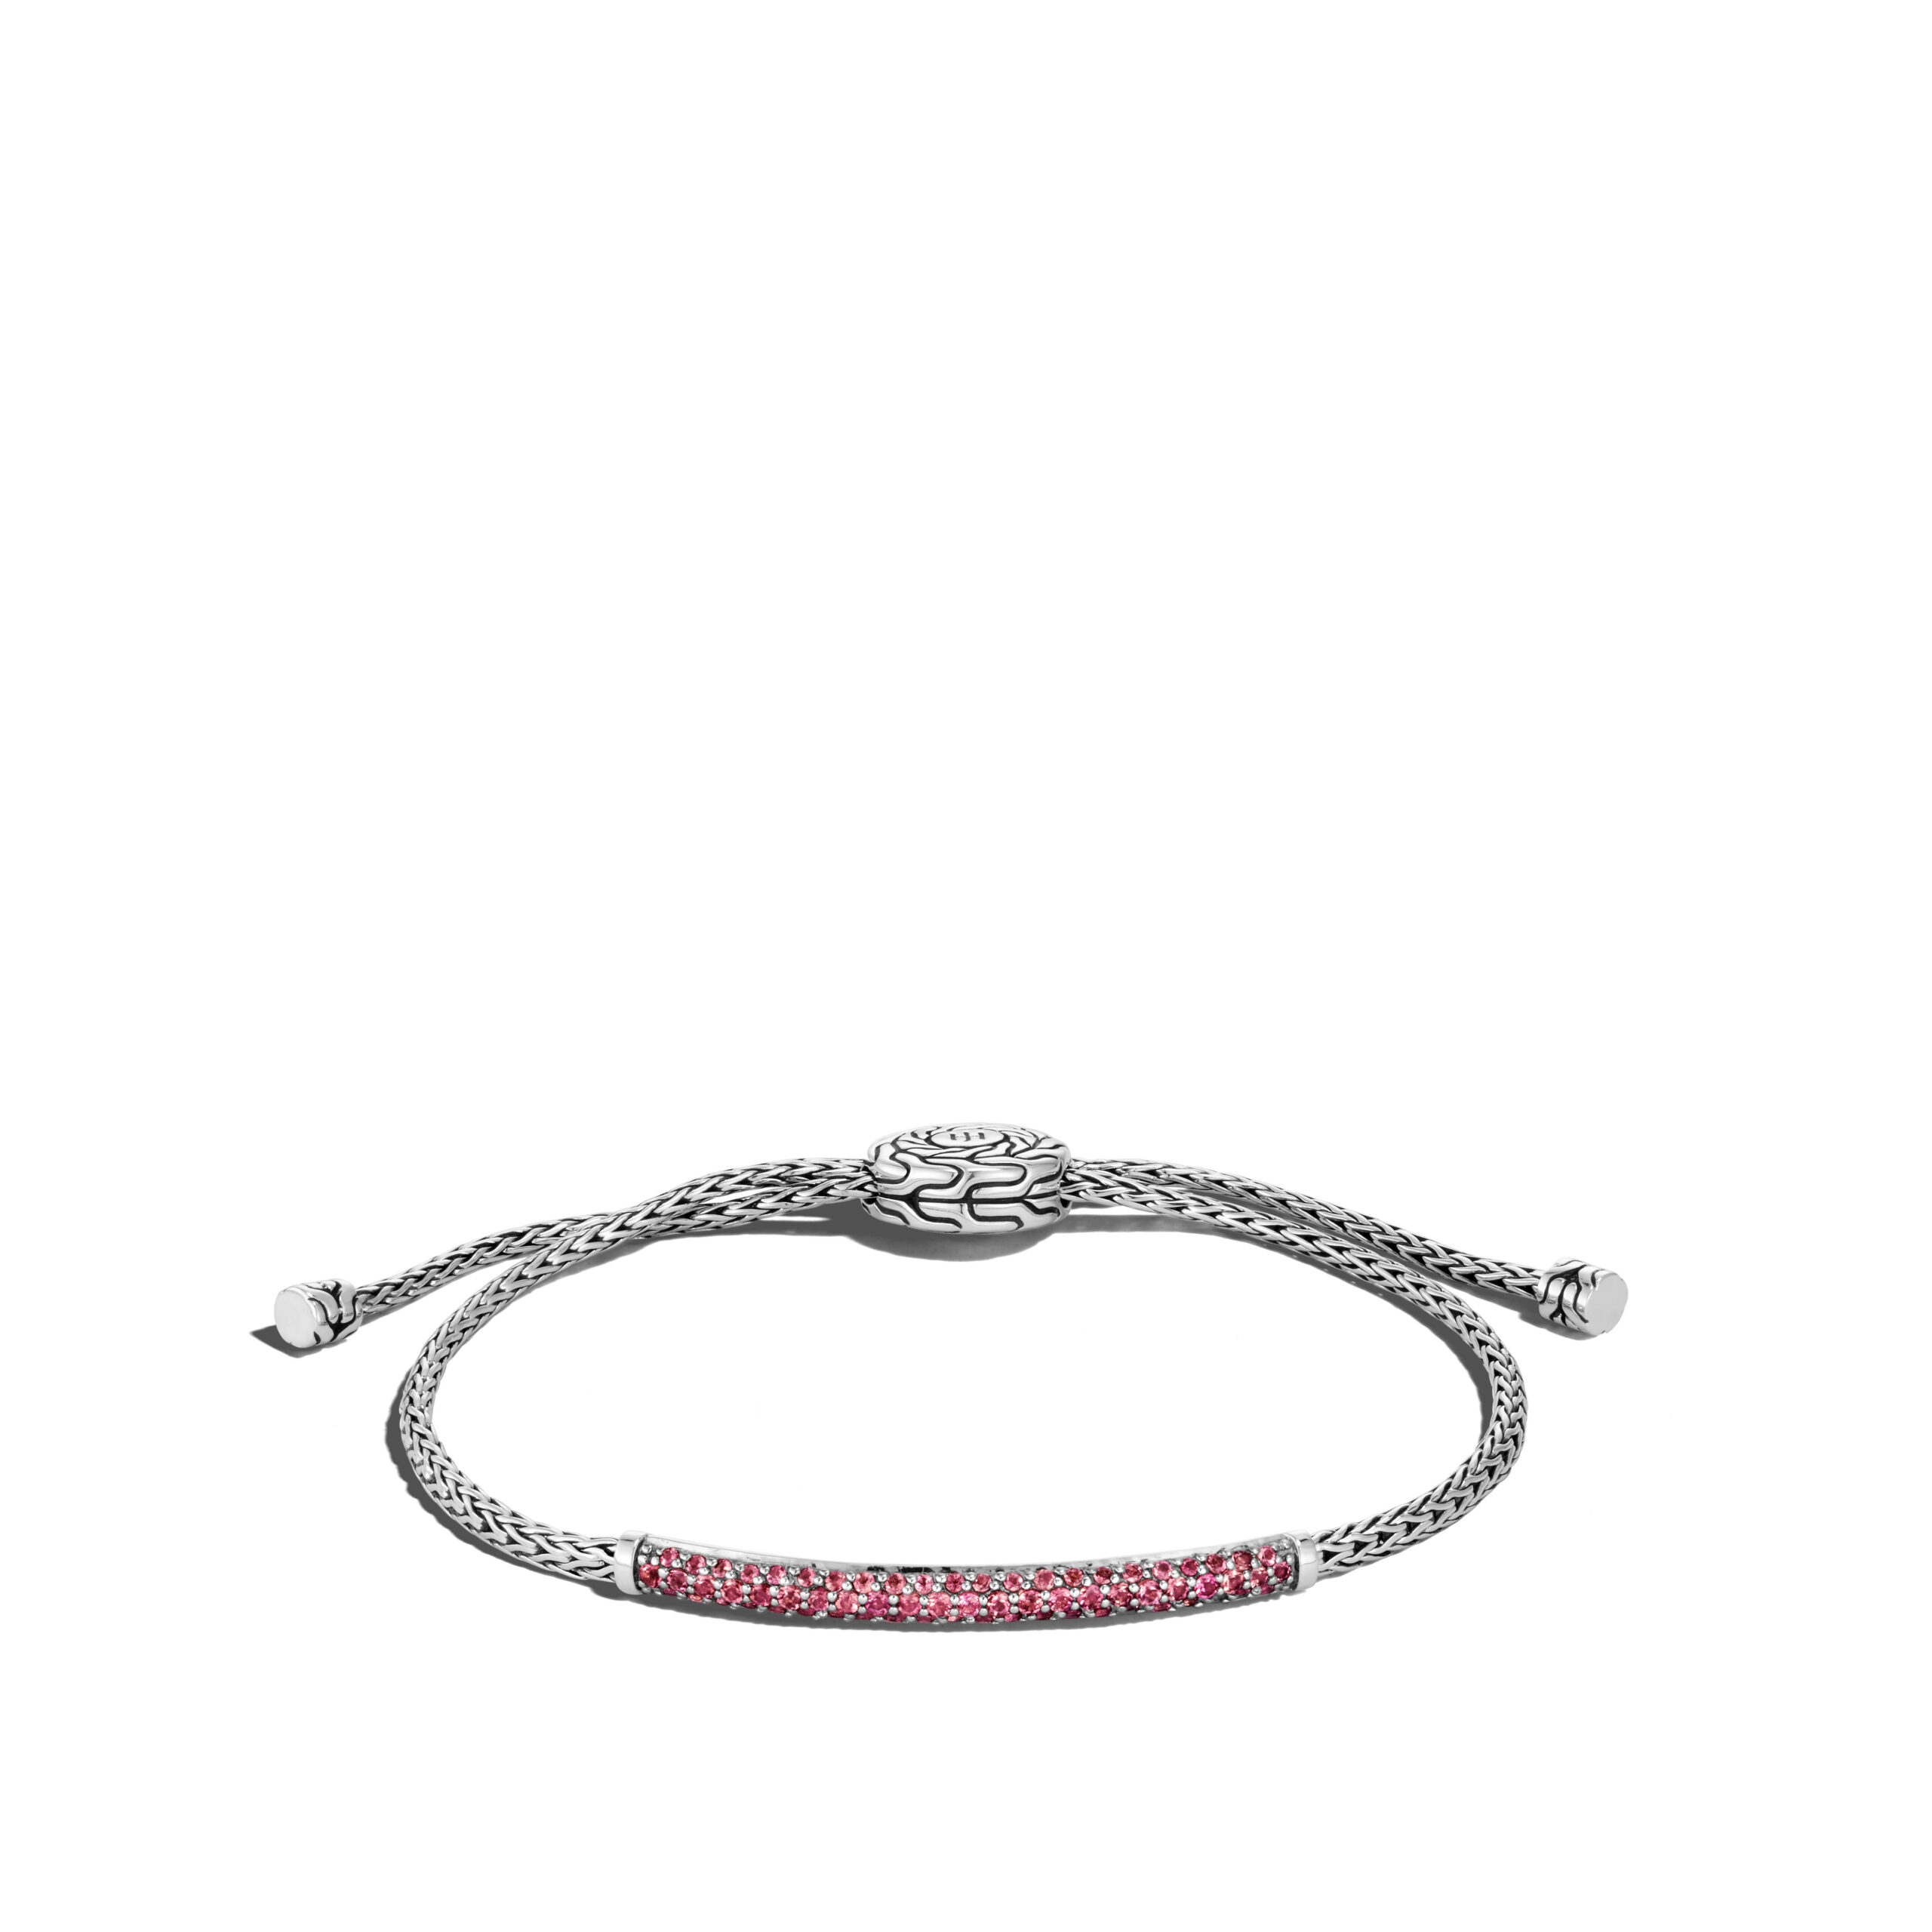 This bracelet by John Hardy is crafted from sterling silver and features treated rubies.